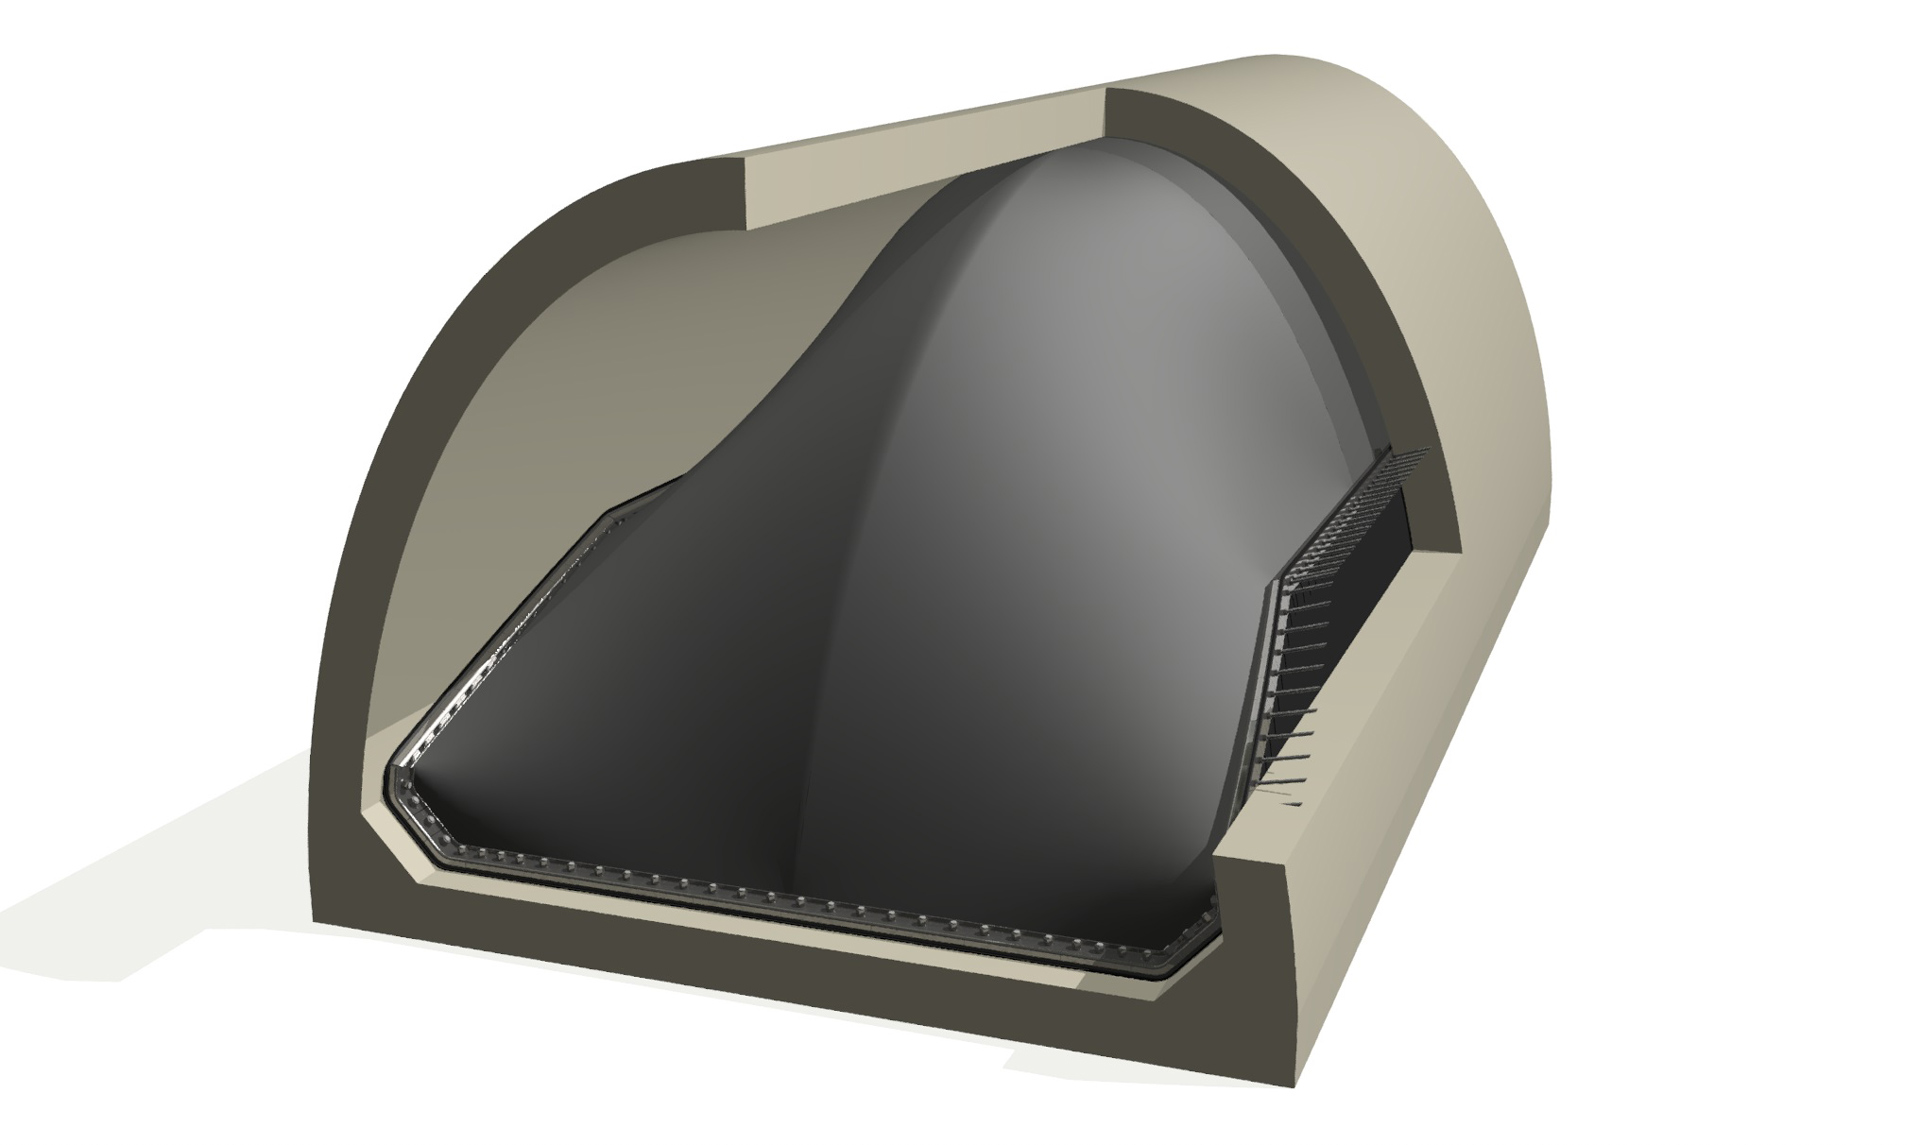 3D-design of an inflatable sewer gate